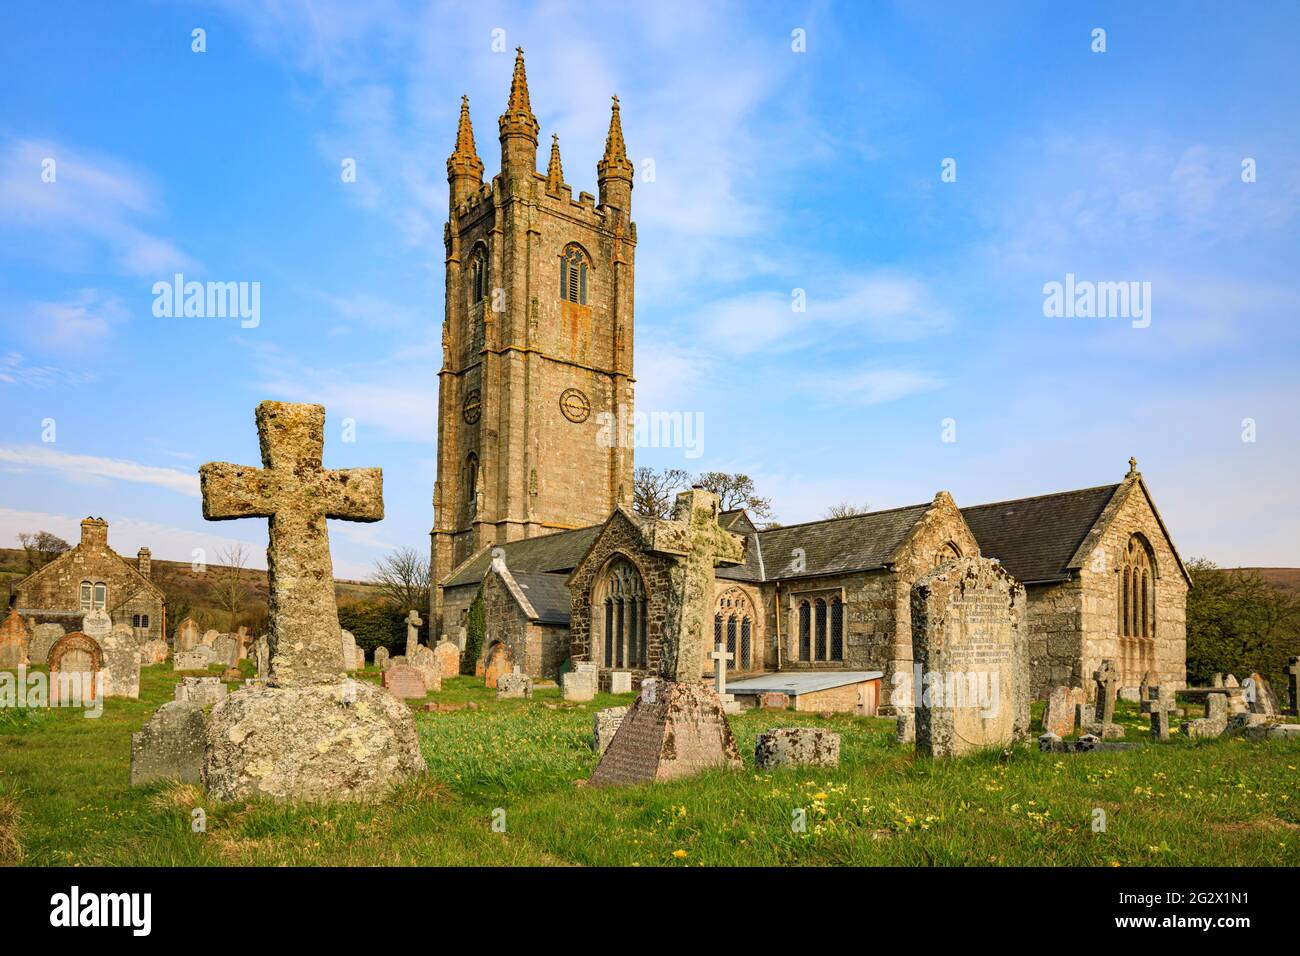 The churchyard at Widecombe-in-the-moor in the Dartmoor National Park, Devon. Stock Photo